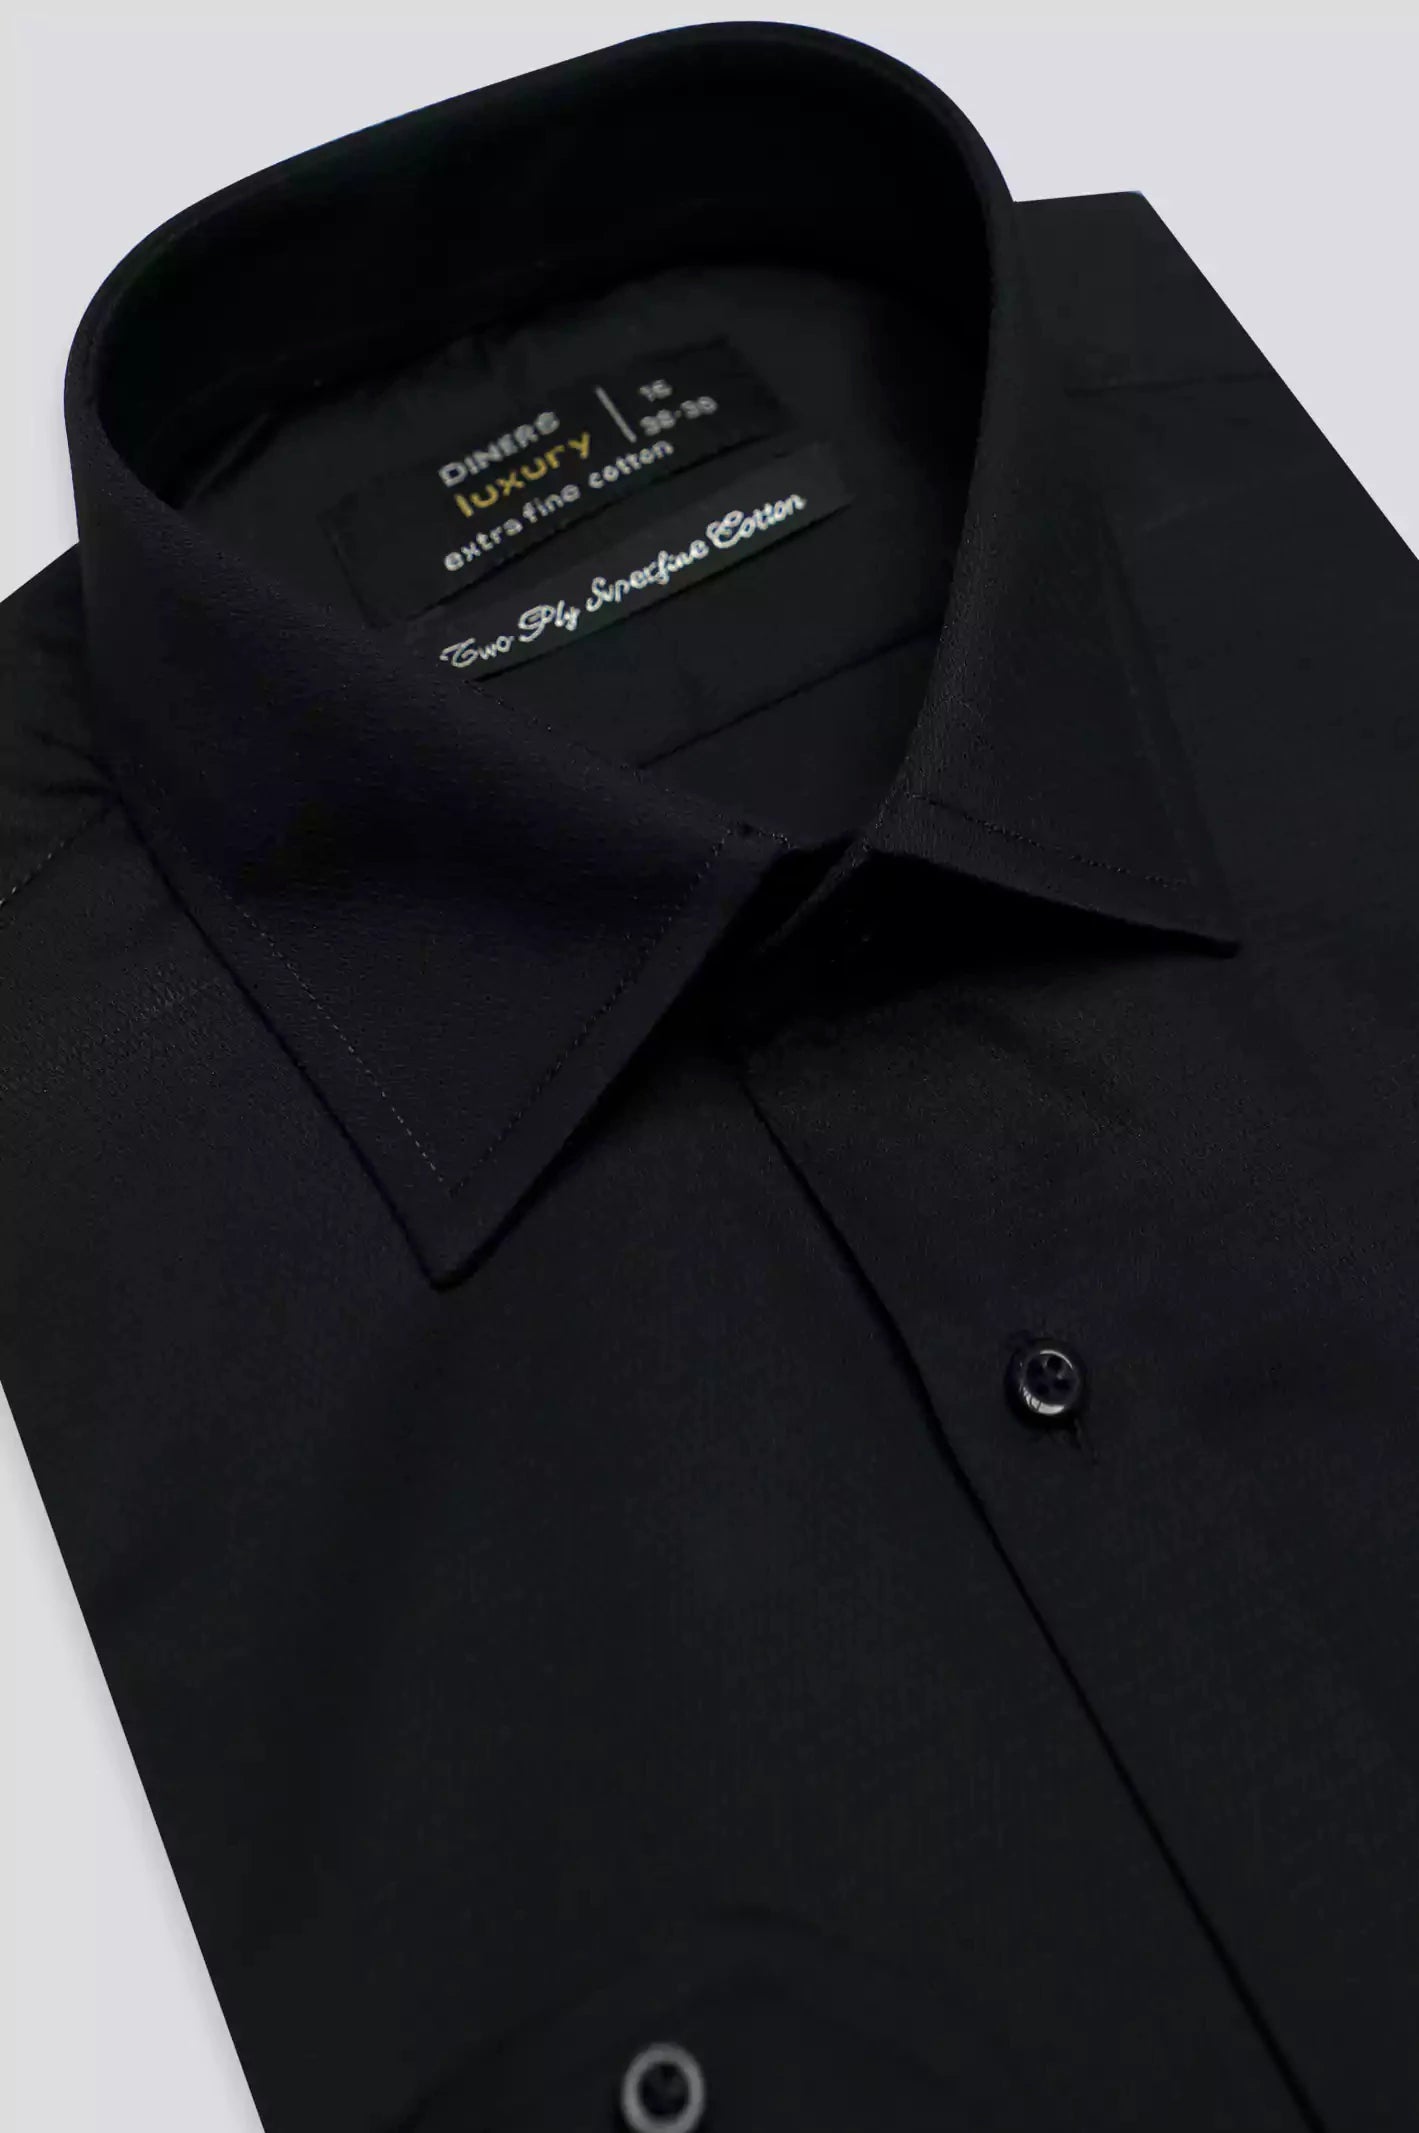 Black Self Textured Formal Shirt From Diners